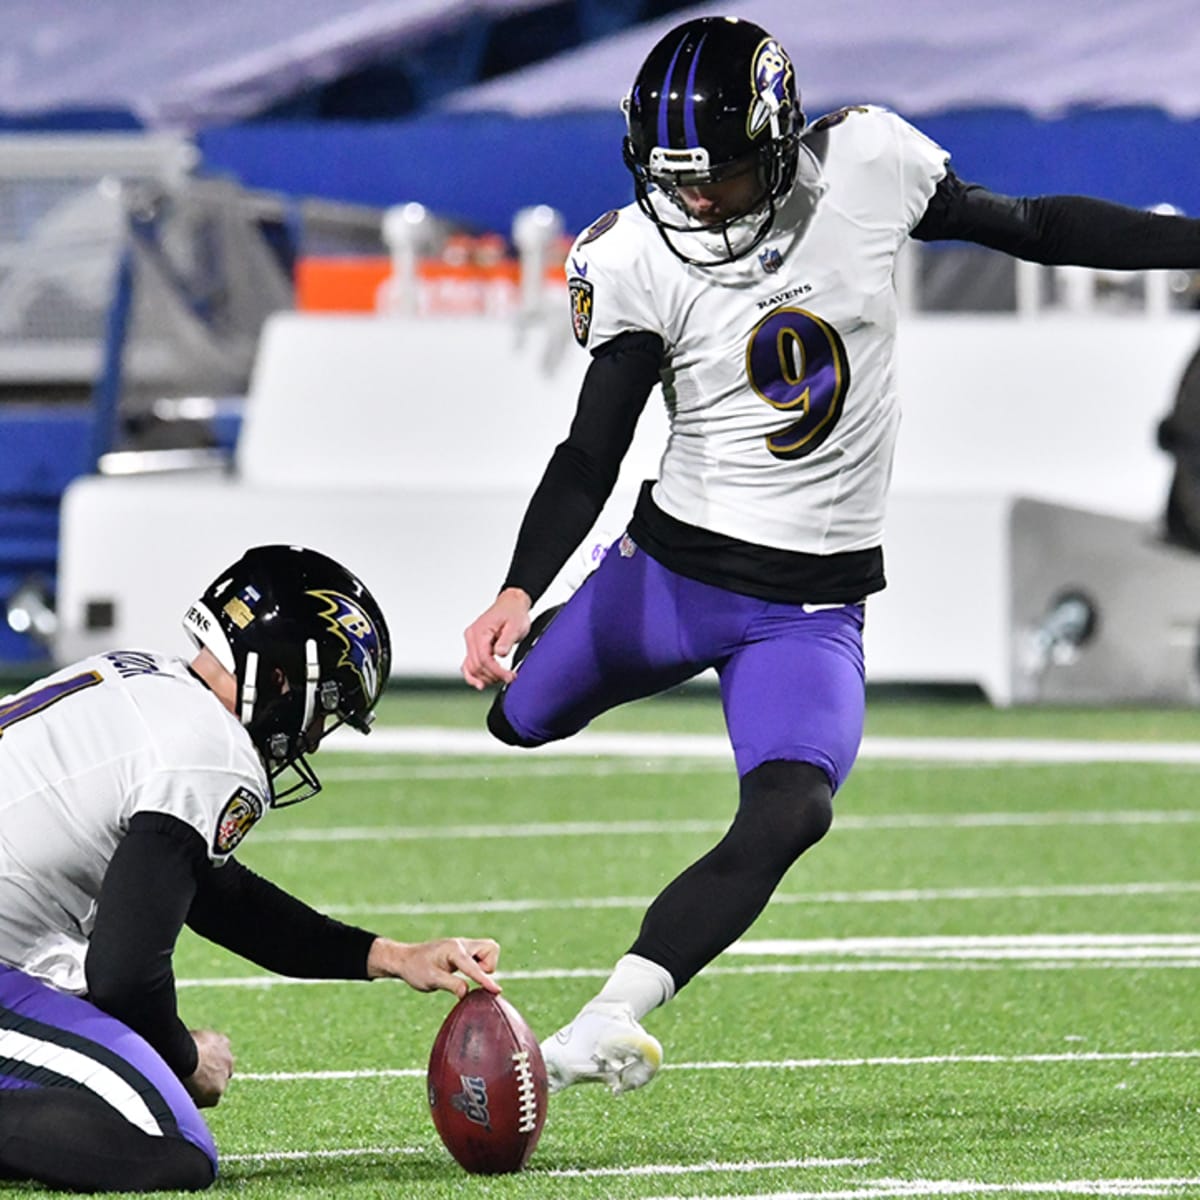 Justin Tucker Misses Extra Point for the First Time in His Career